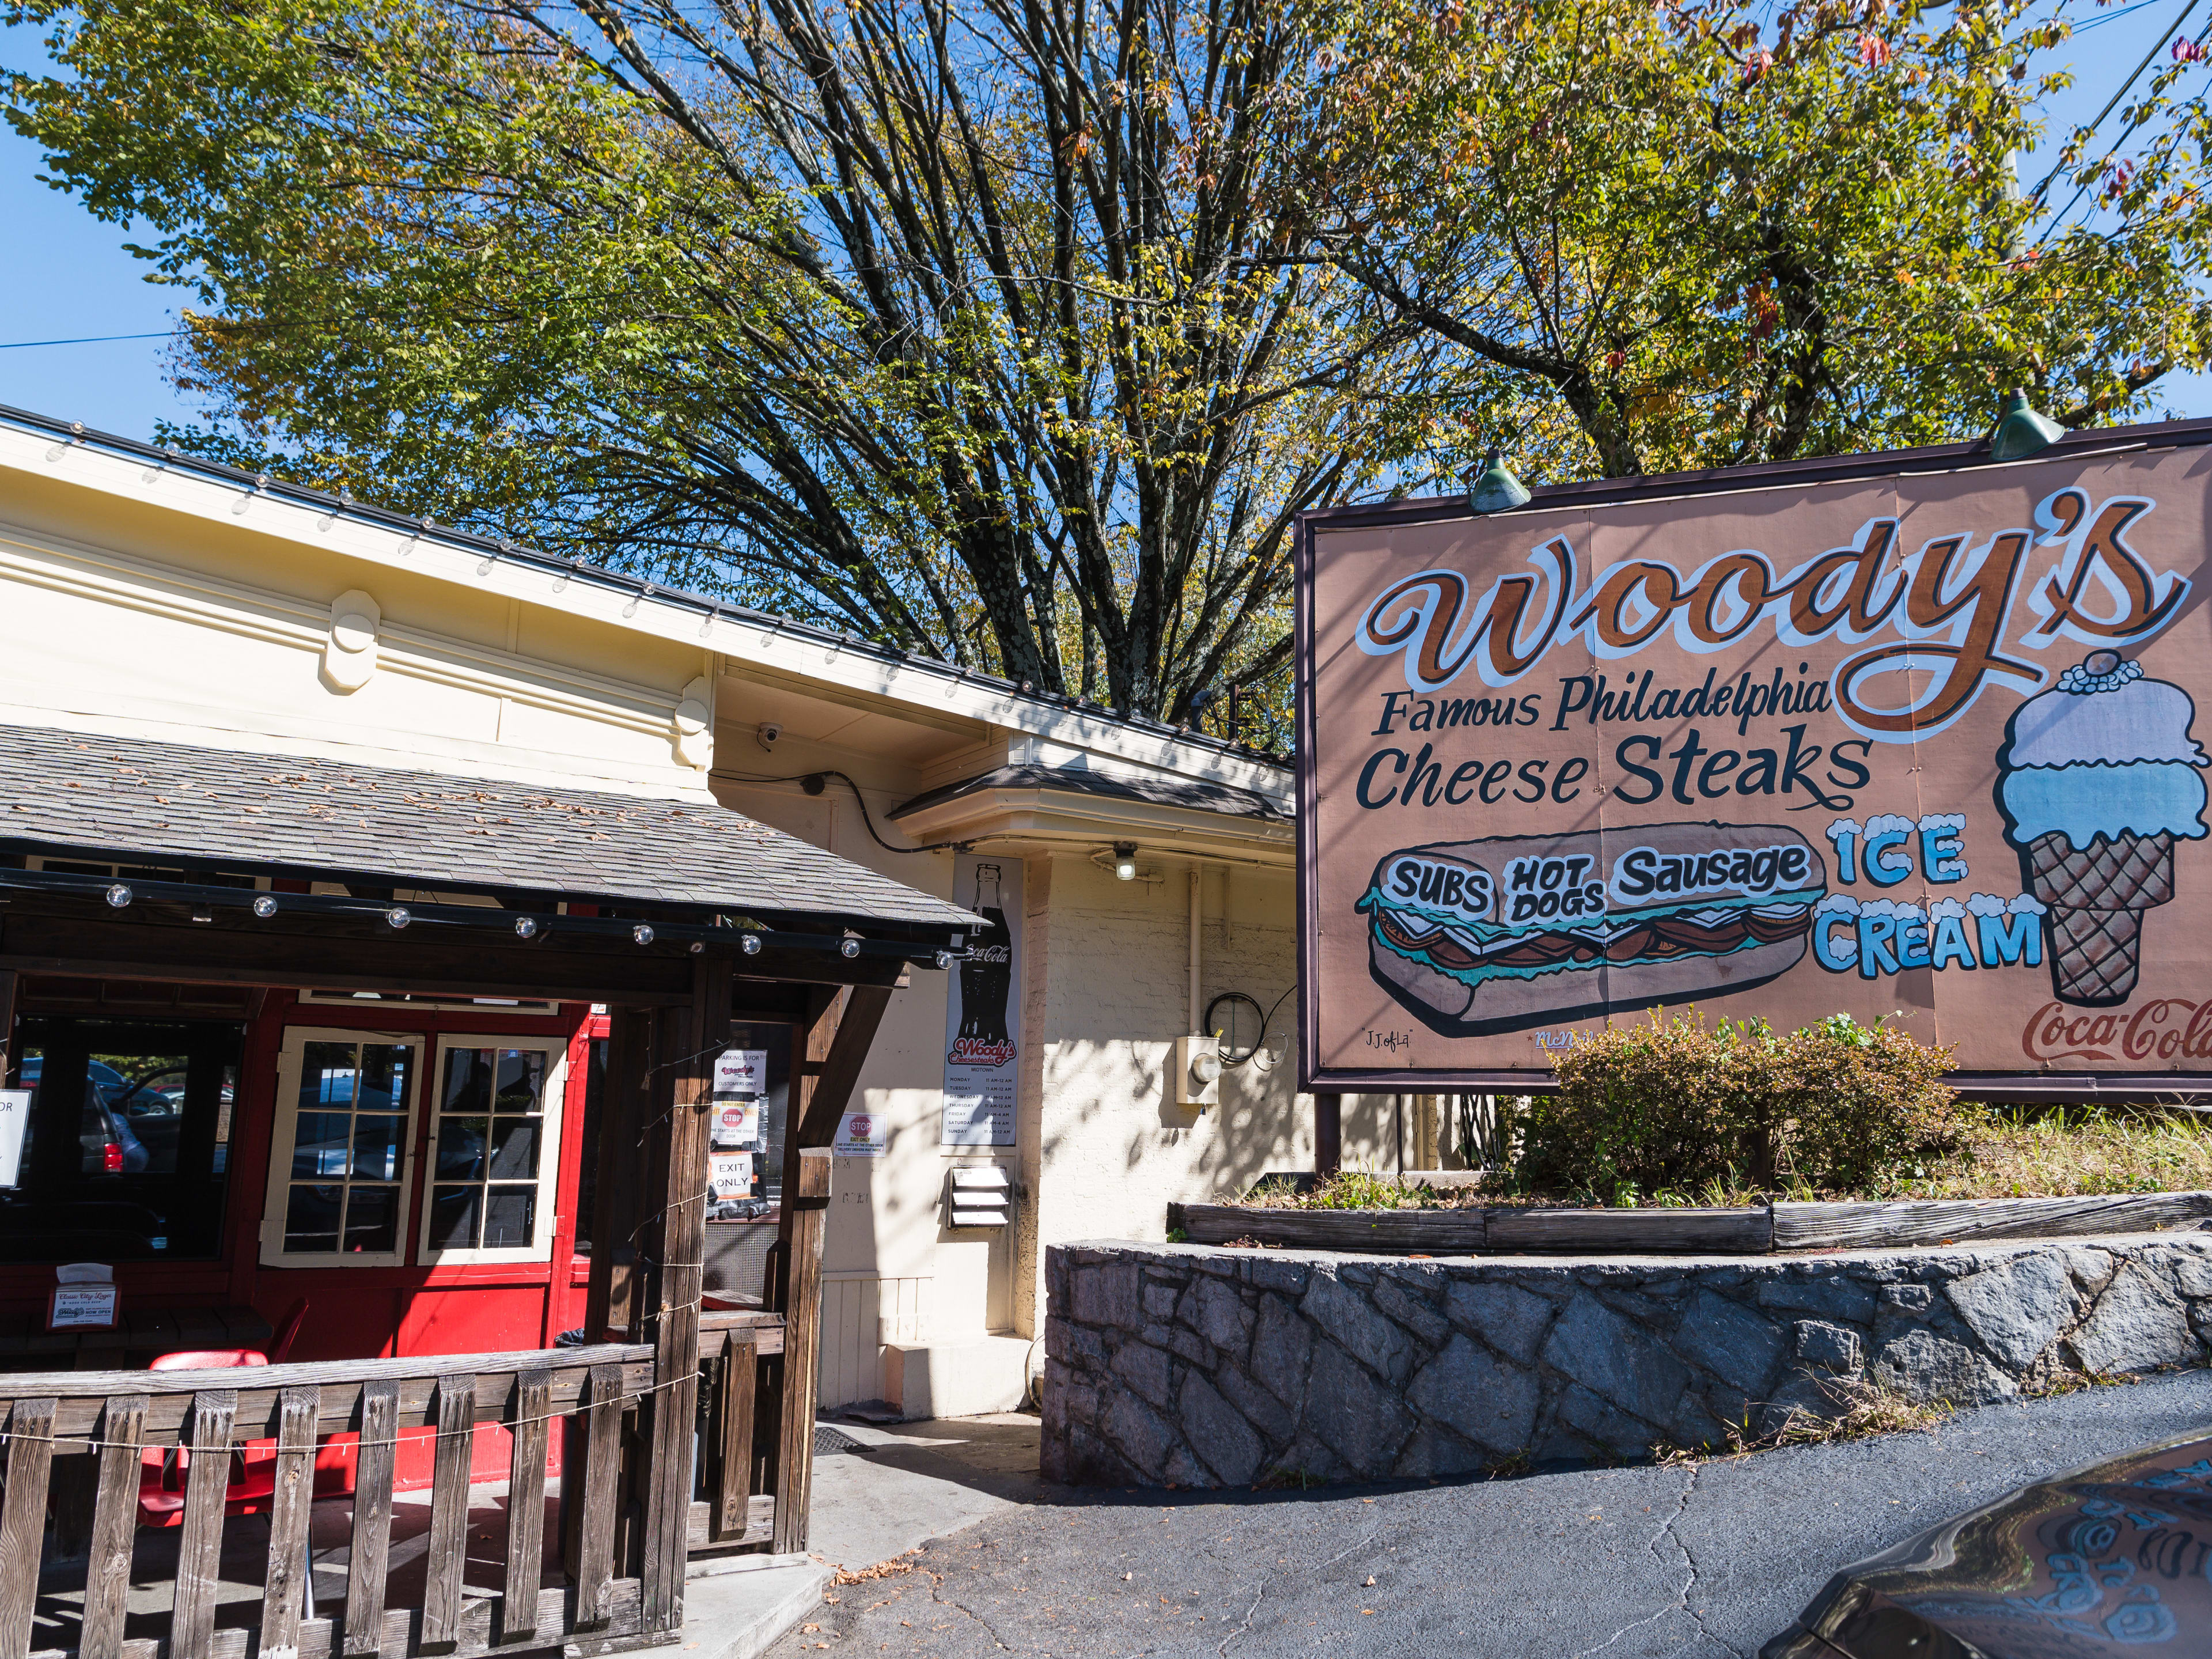 The exterior of Woody's.